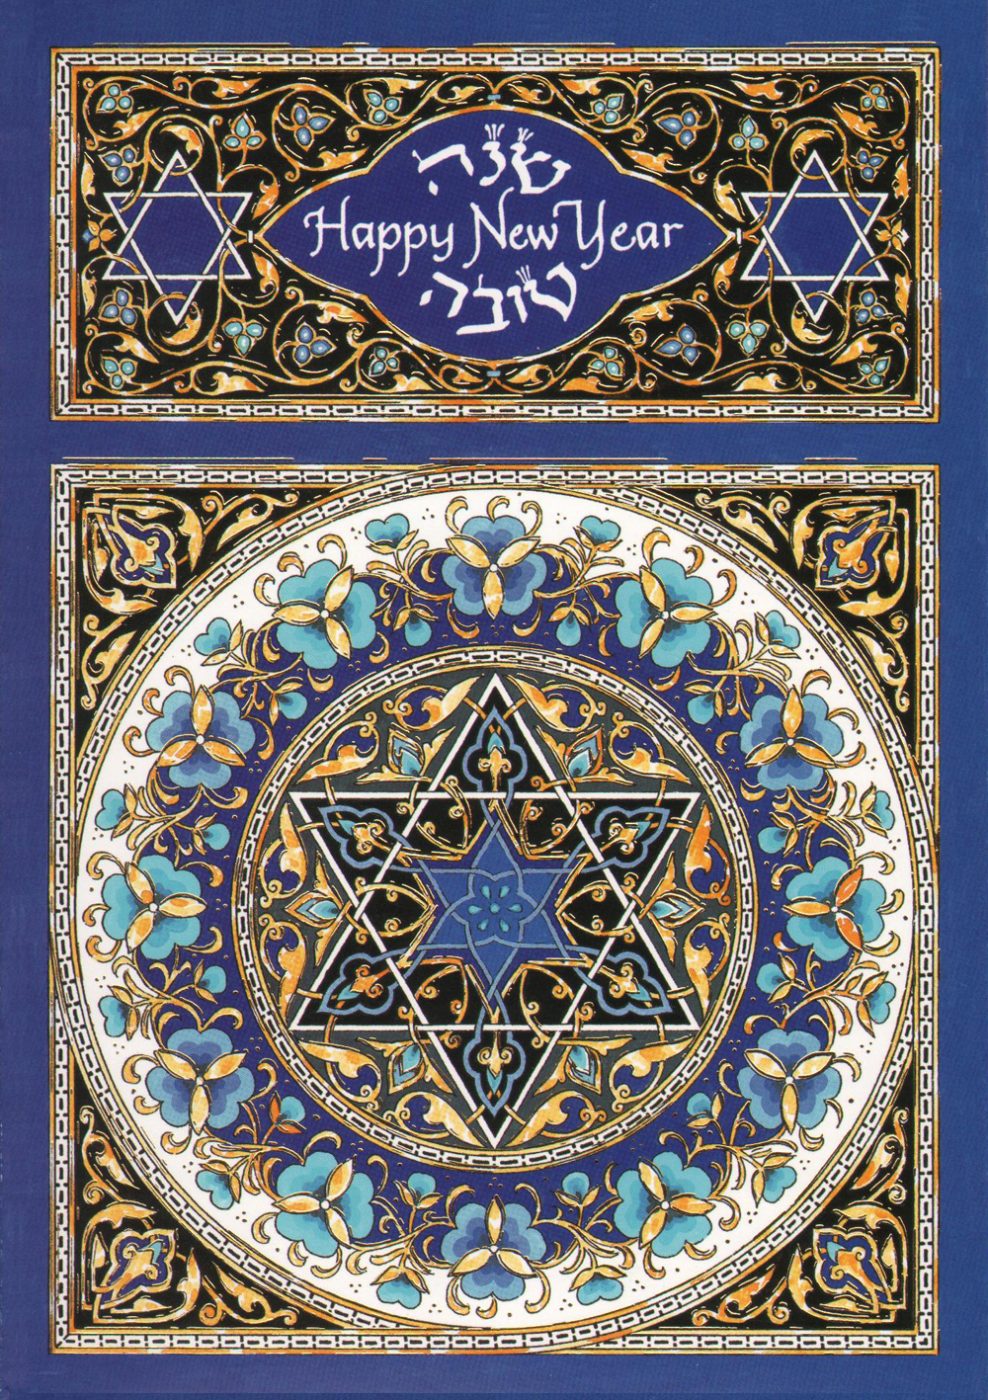 Cards For Jewish New Year